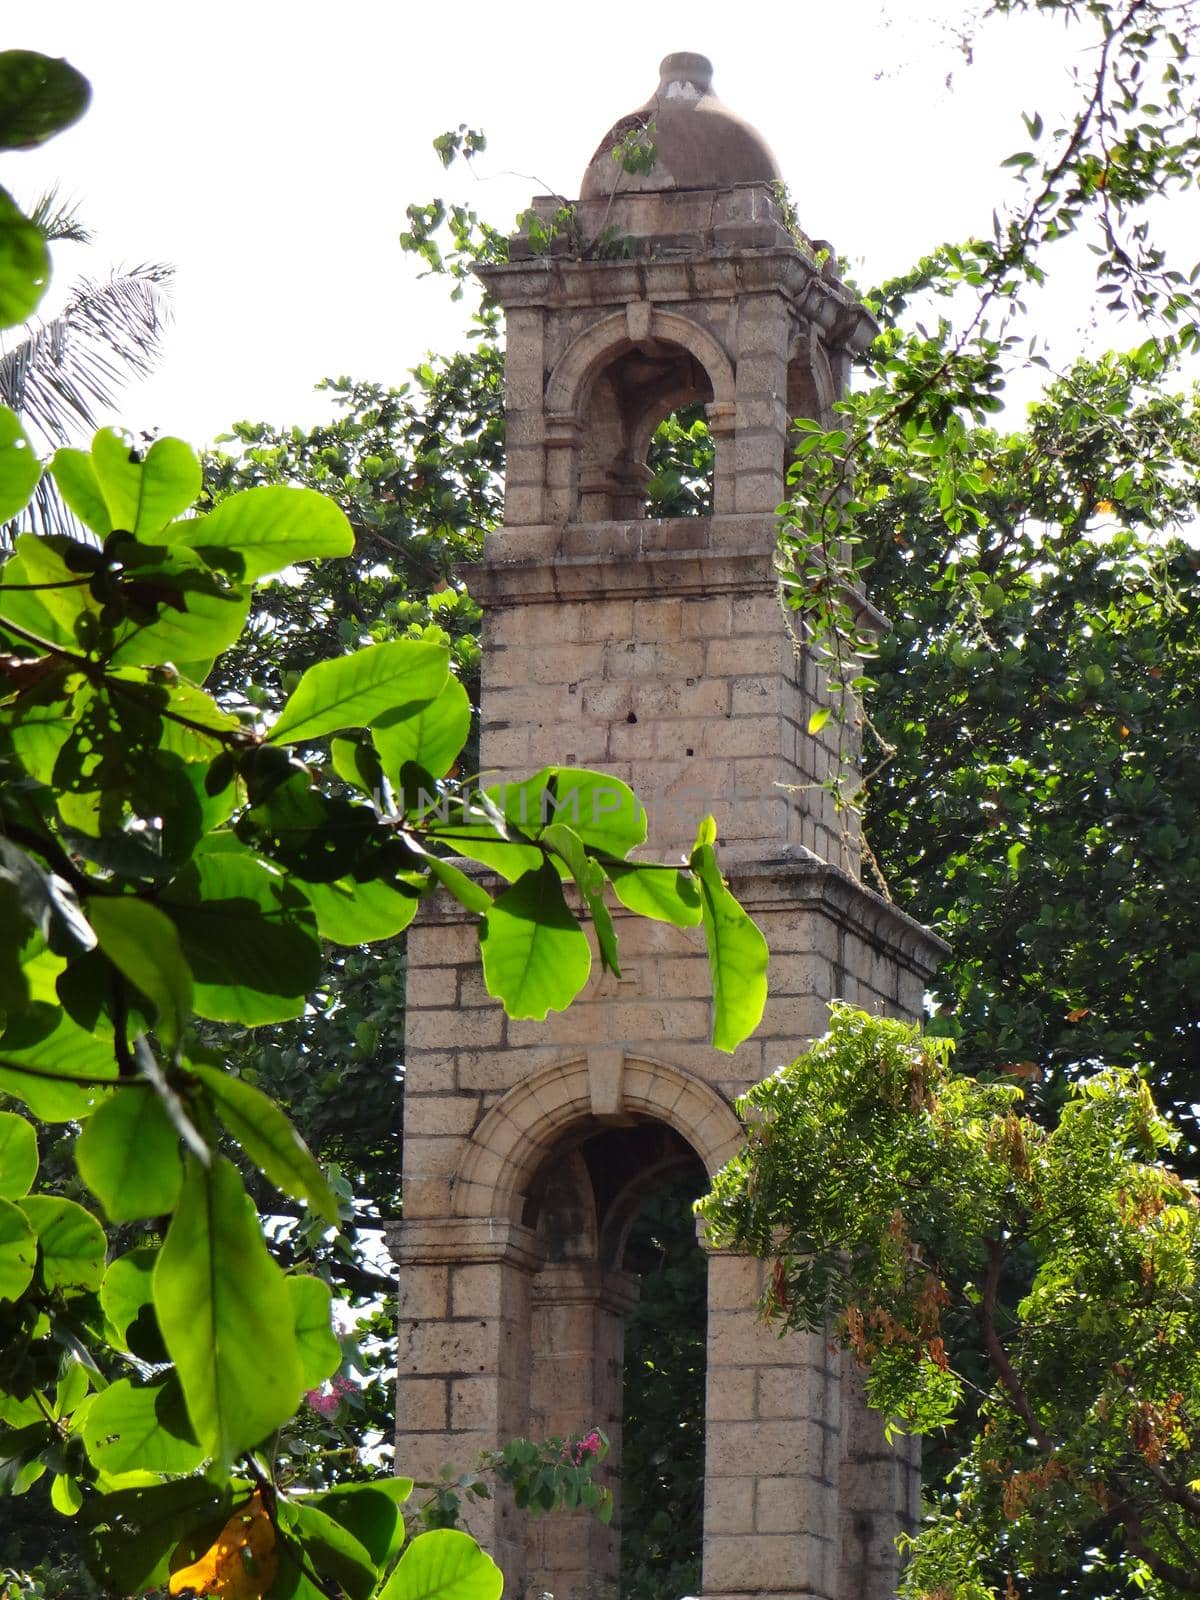 Tower of the abandoned Negombo fort, Sri Lanka by Capos